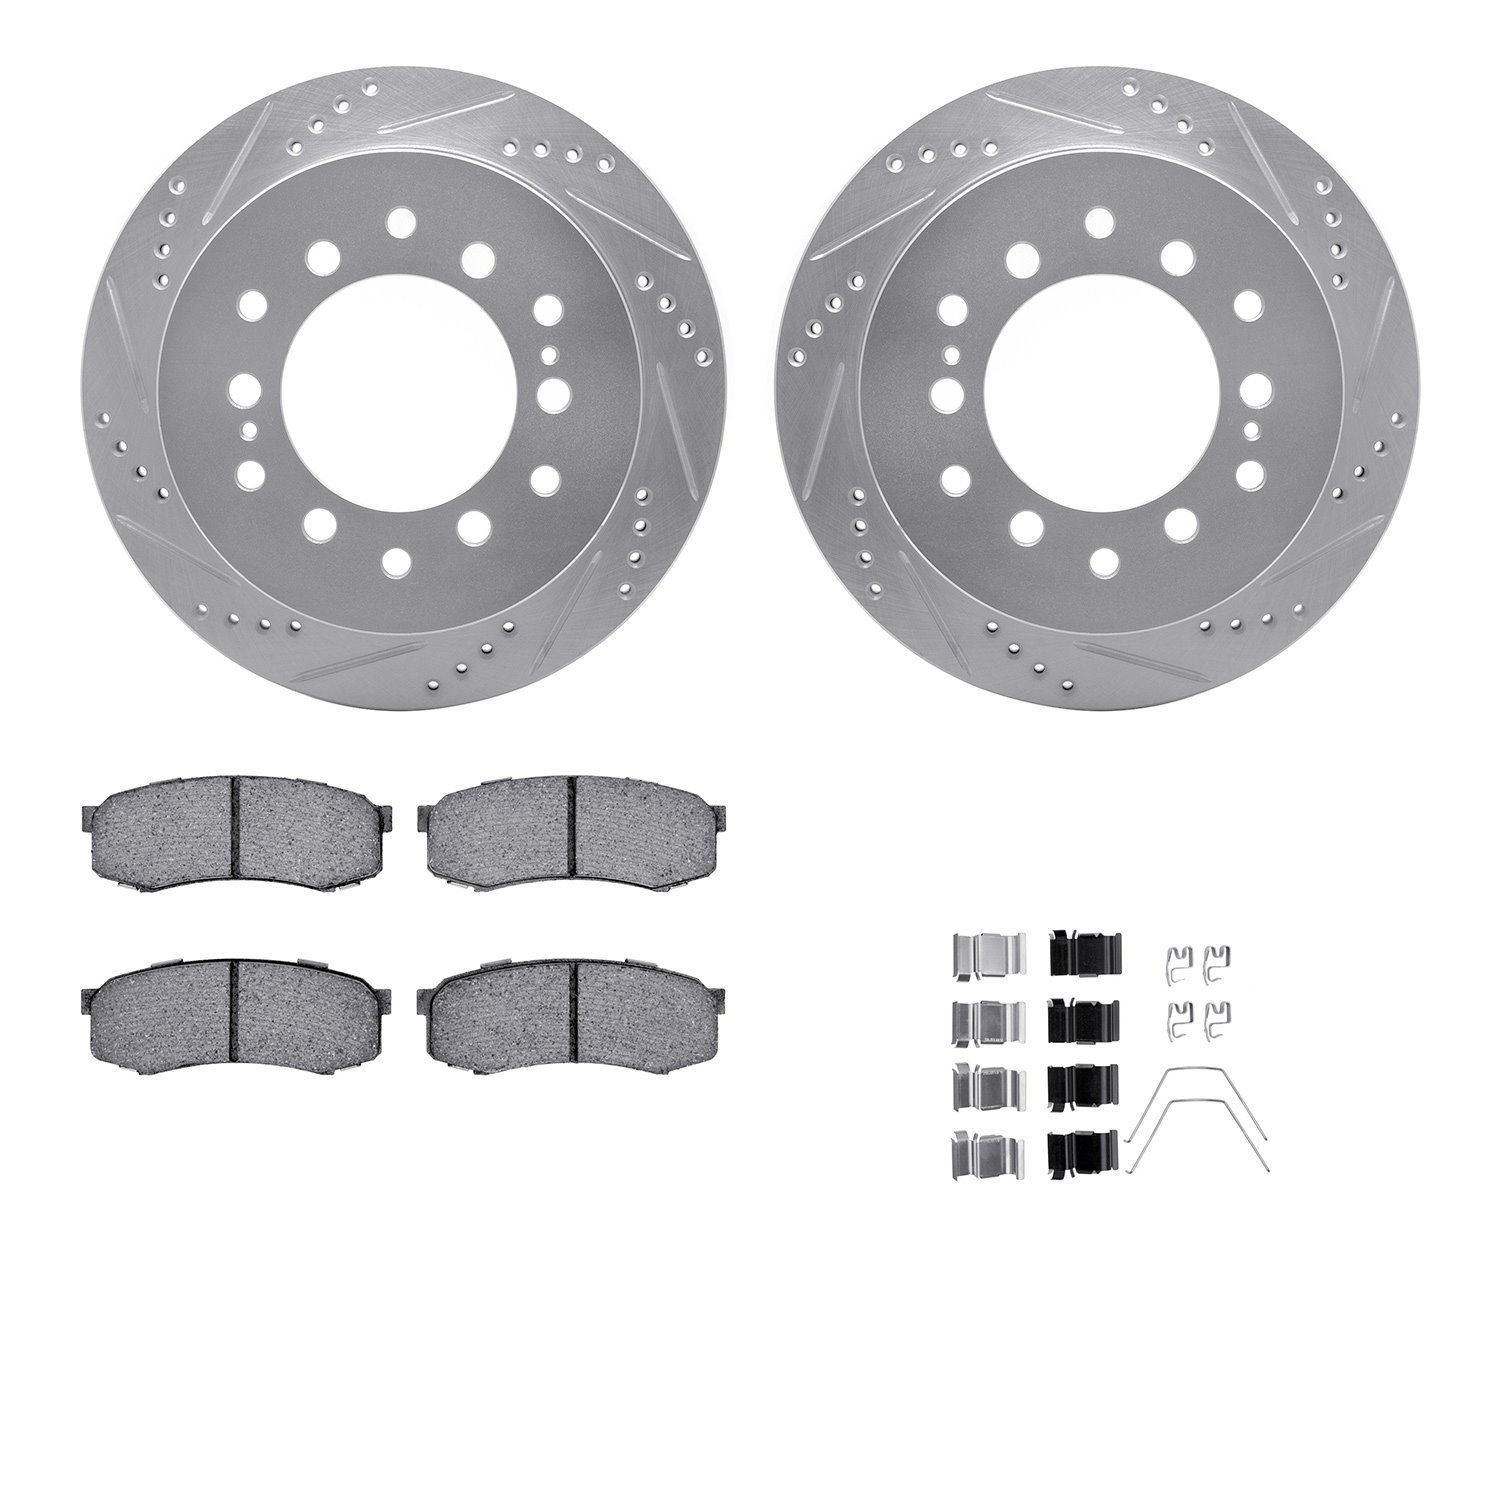 7412-76016 Drilled/Slotted Brake Rotors with Ultimate-Duty Brake Pads Kit & Hardware [Silver], 2001-2009 Lexus/Toyota/Scion, Pos